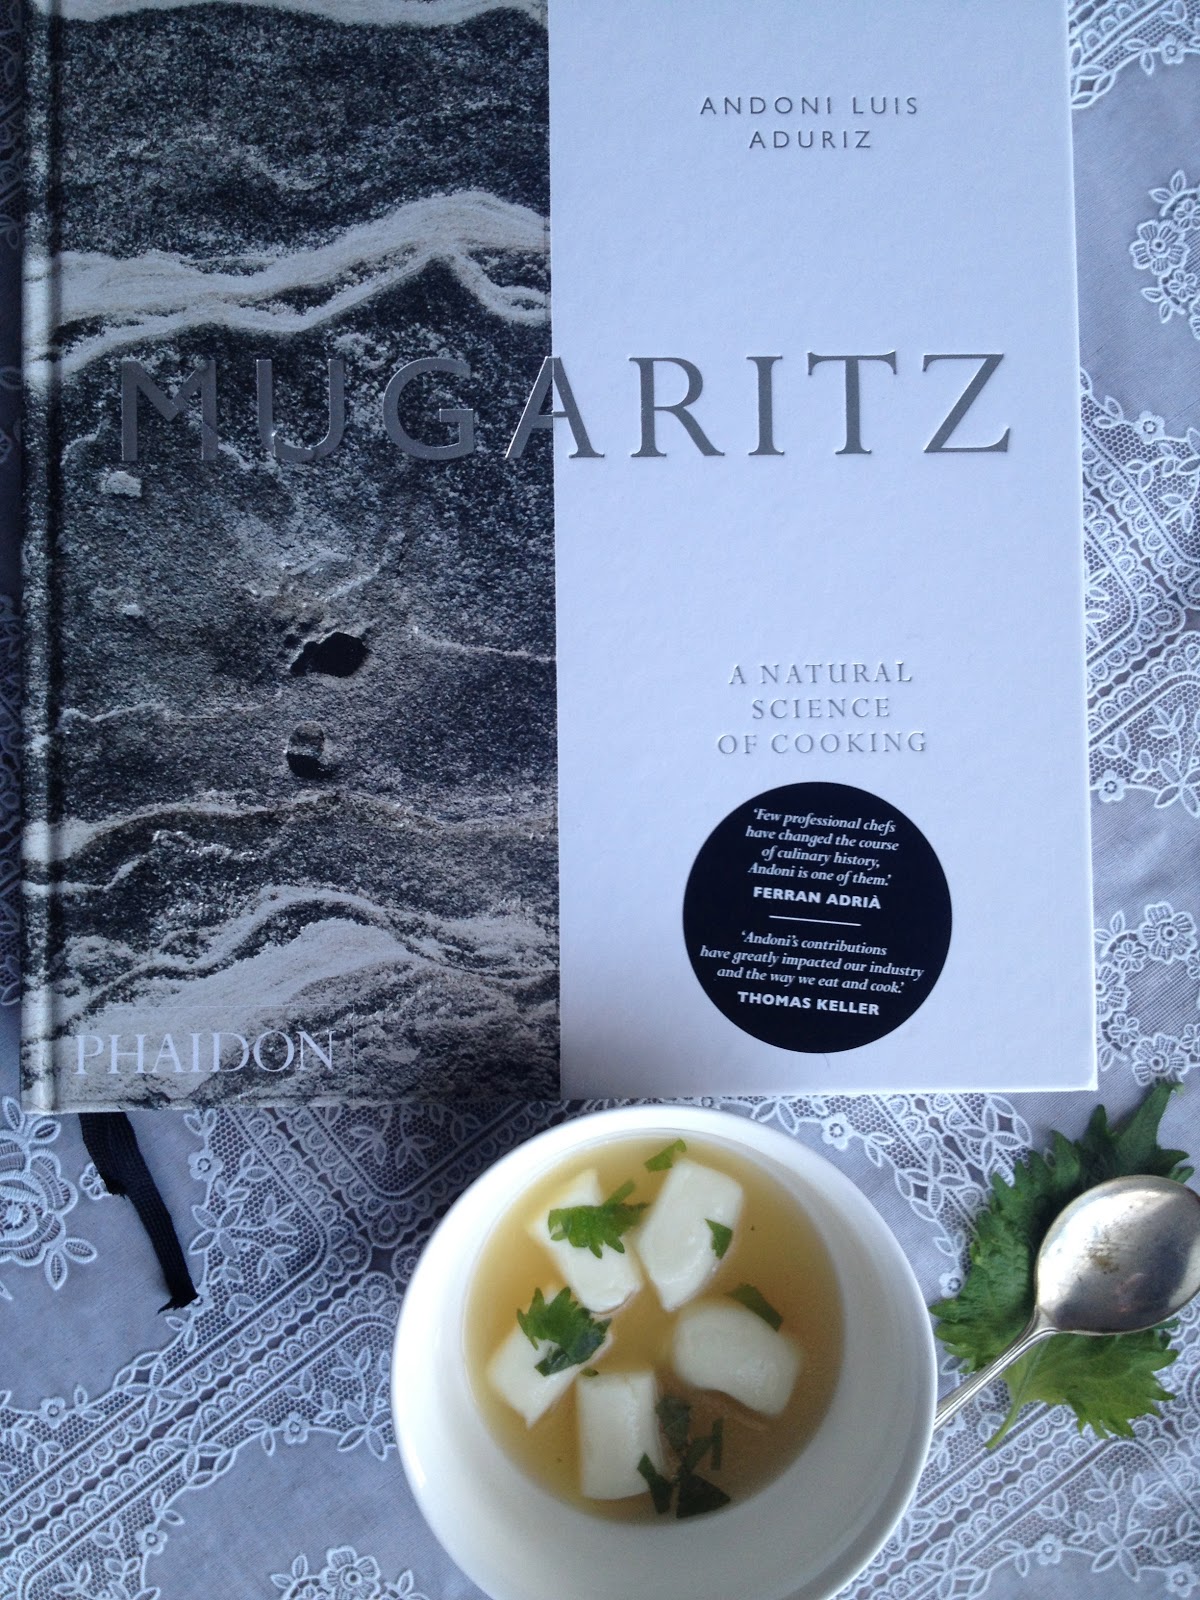 Mugaritz, a natural science of cooking Hot and Chilli